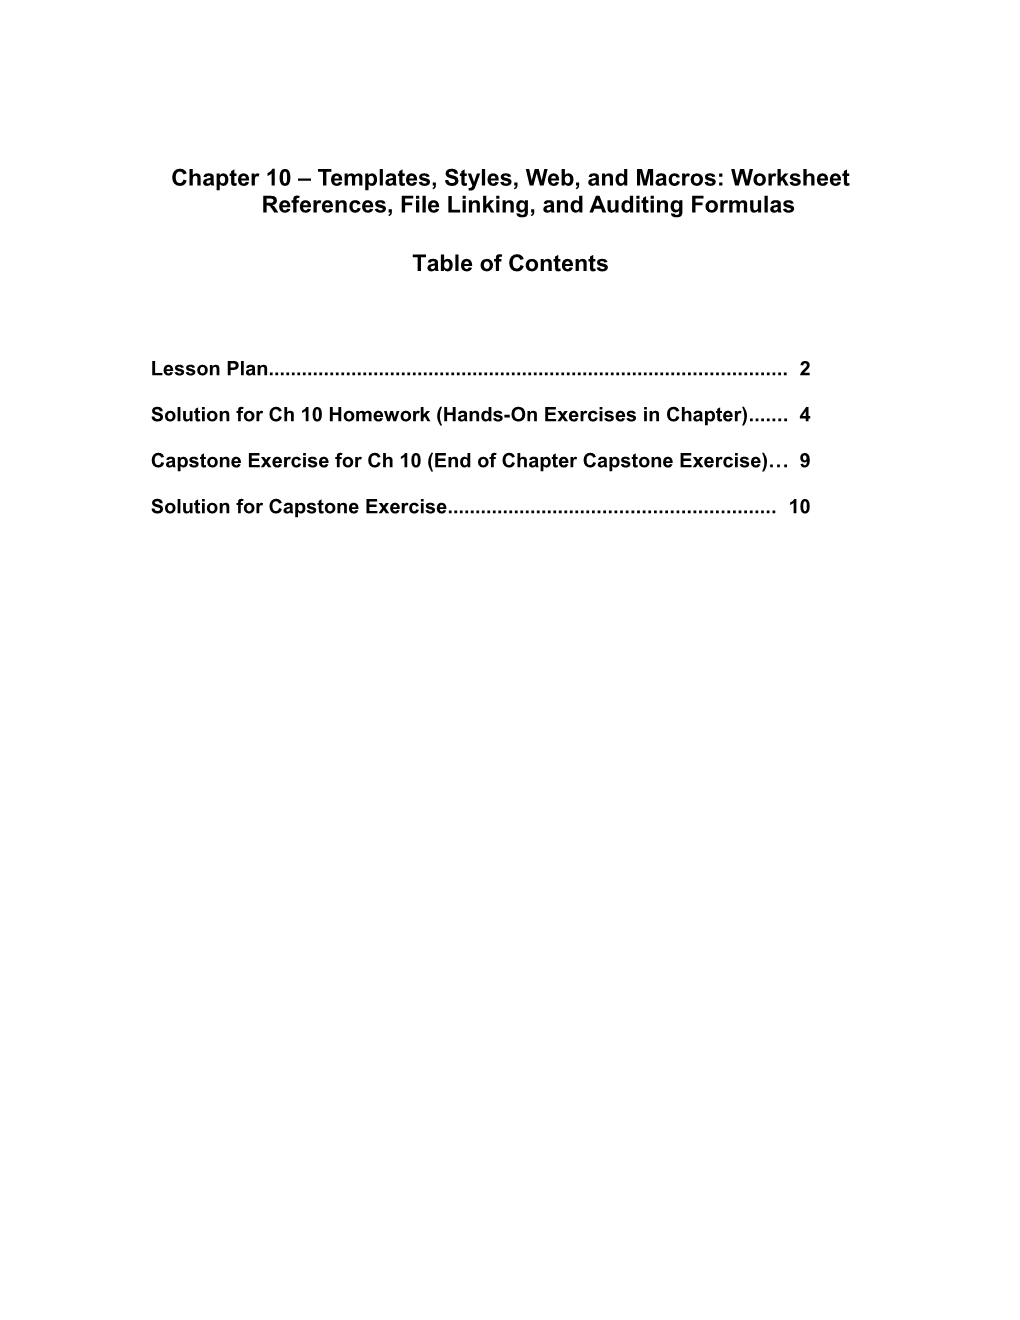 Chapter 10 Templates, Styles, Web, and Macros: Worksheet References, File Linking, And